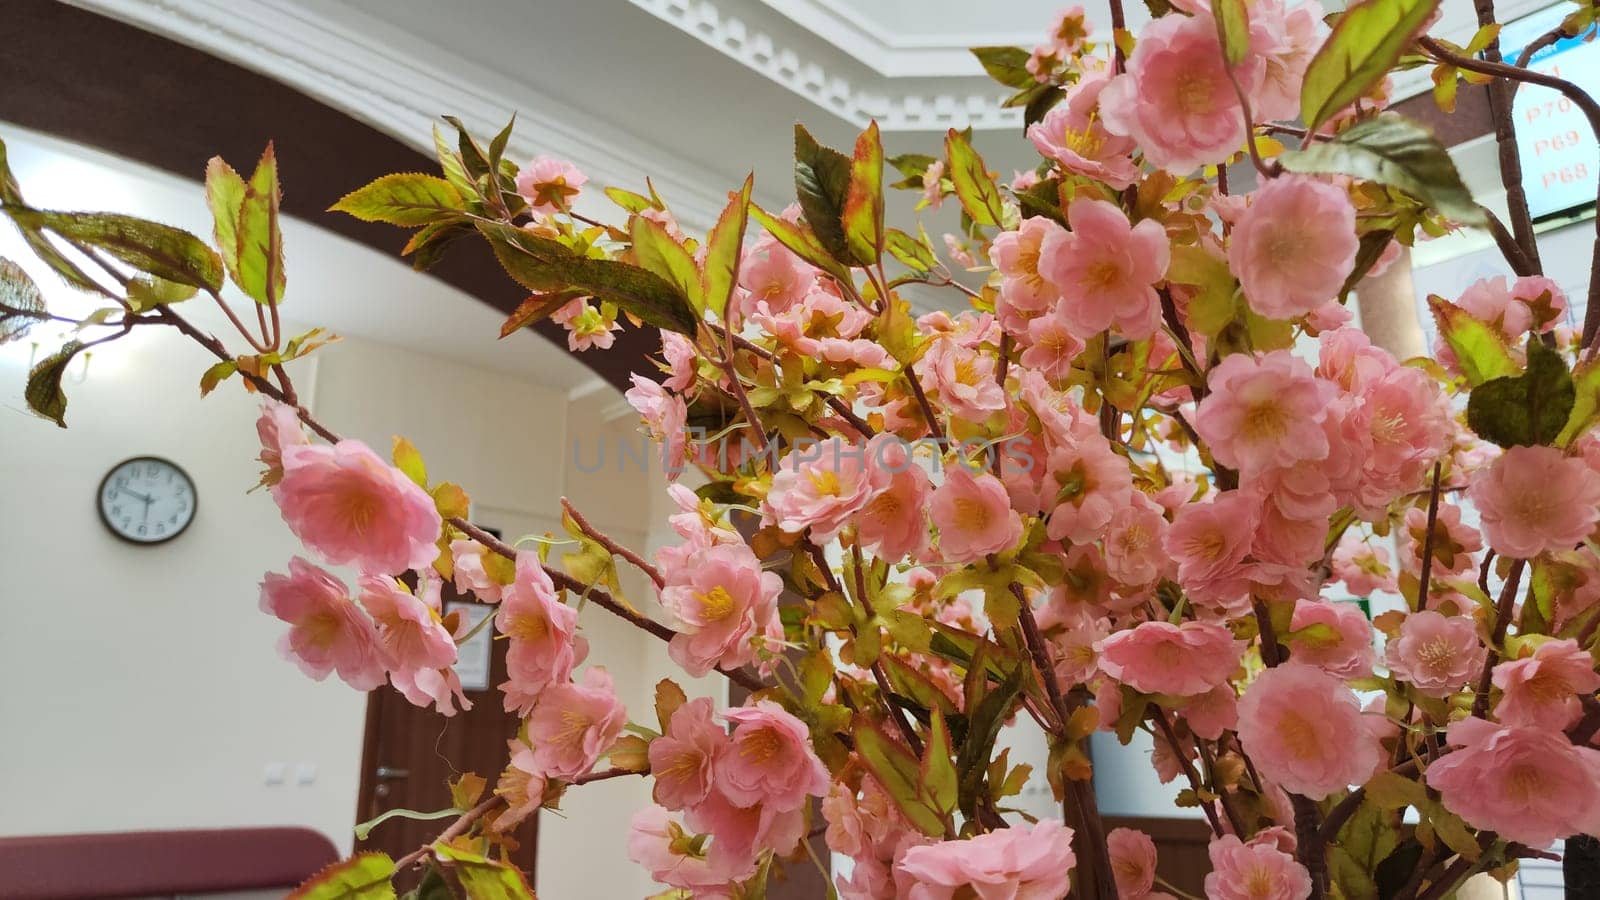 Branches with delicate spring pink cherry blossoms on the background of white ceiling with stucco. Beautiful interior